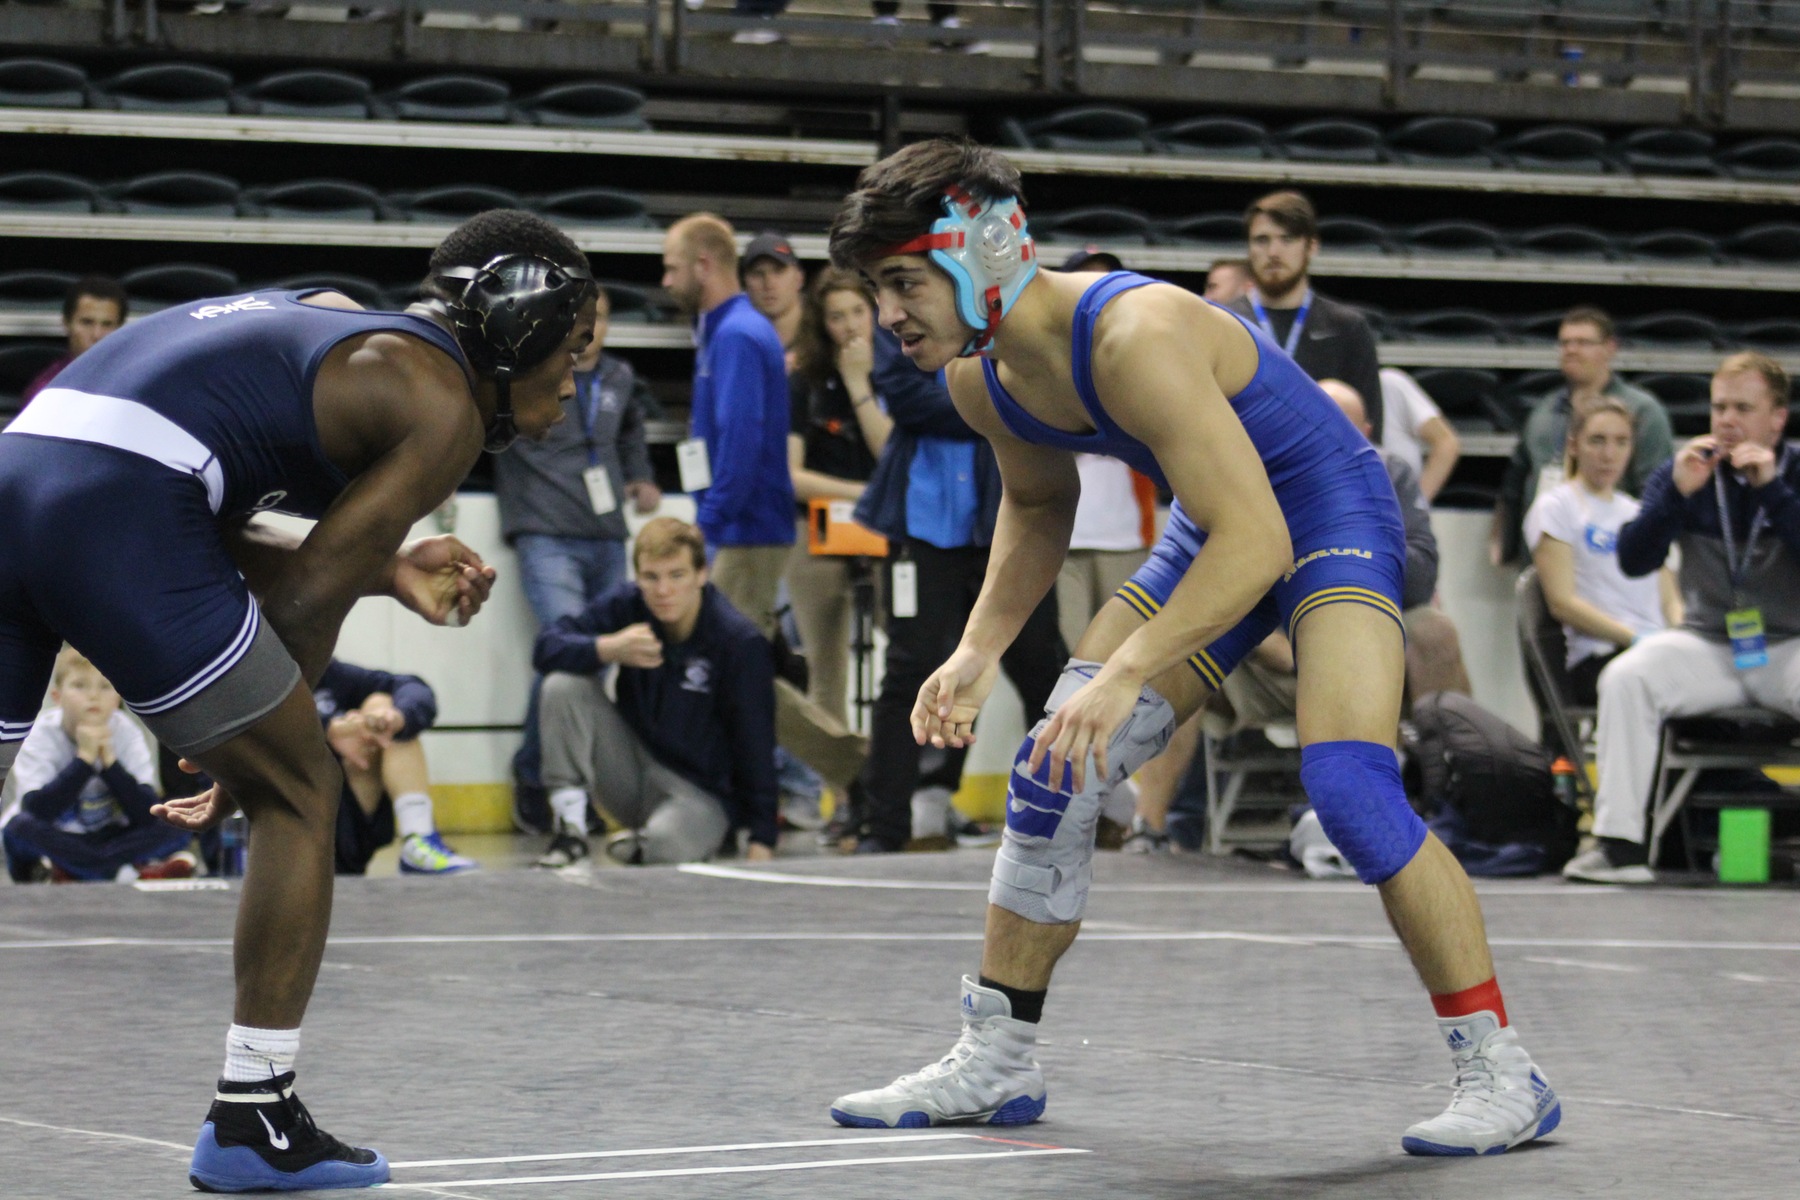 NIACC's Mark Gonzales battles with Iowa Central's Kevin Radcliff in 125-pound consolation match Friday. Gonzales won 8-4.